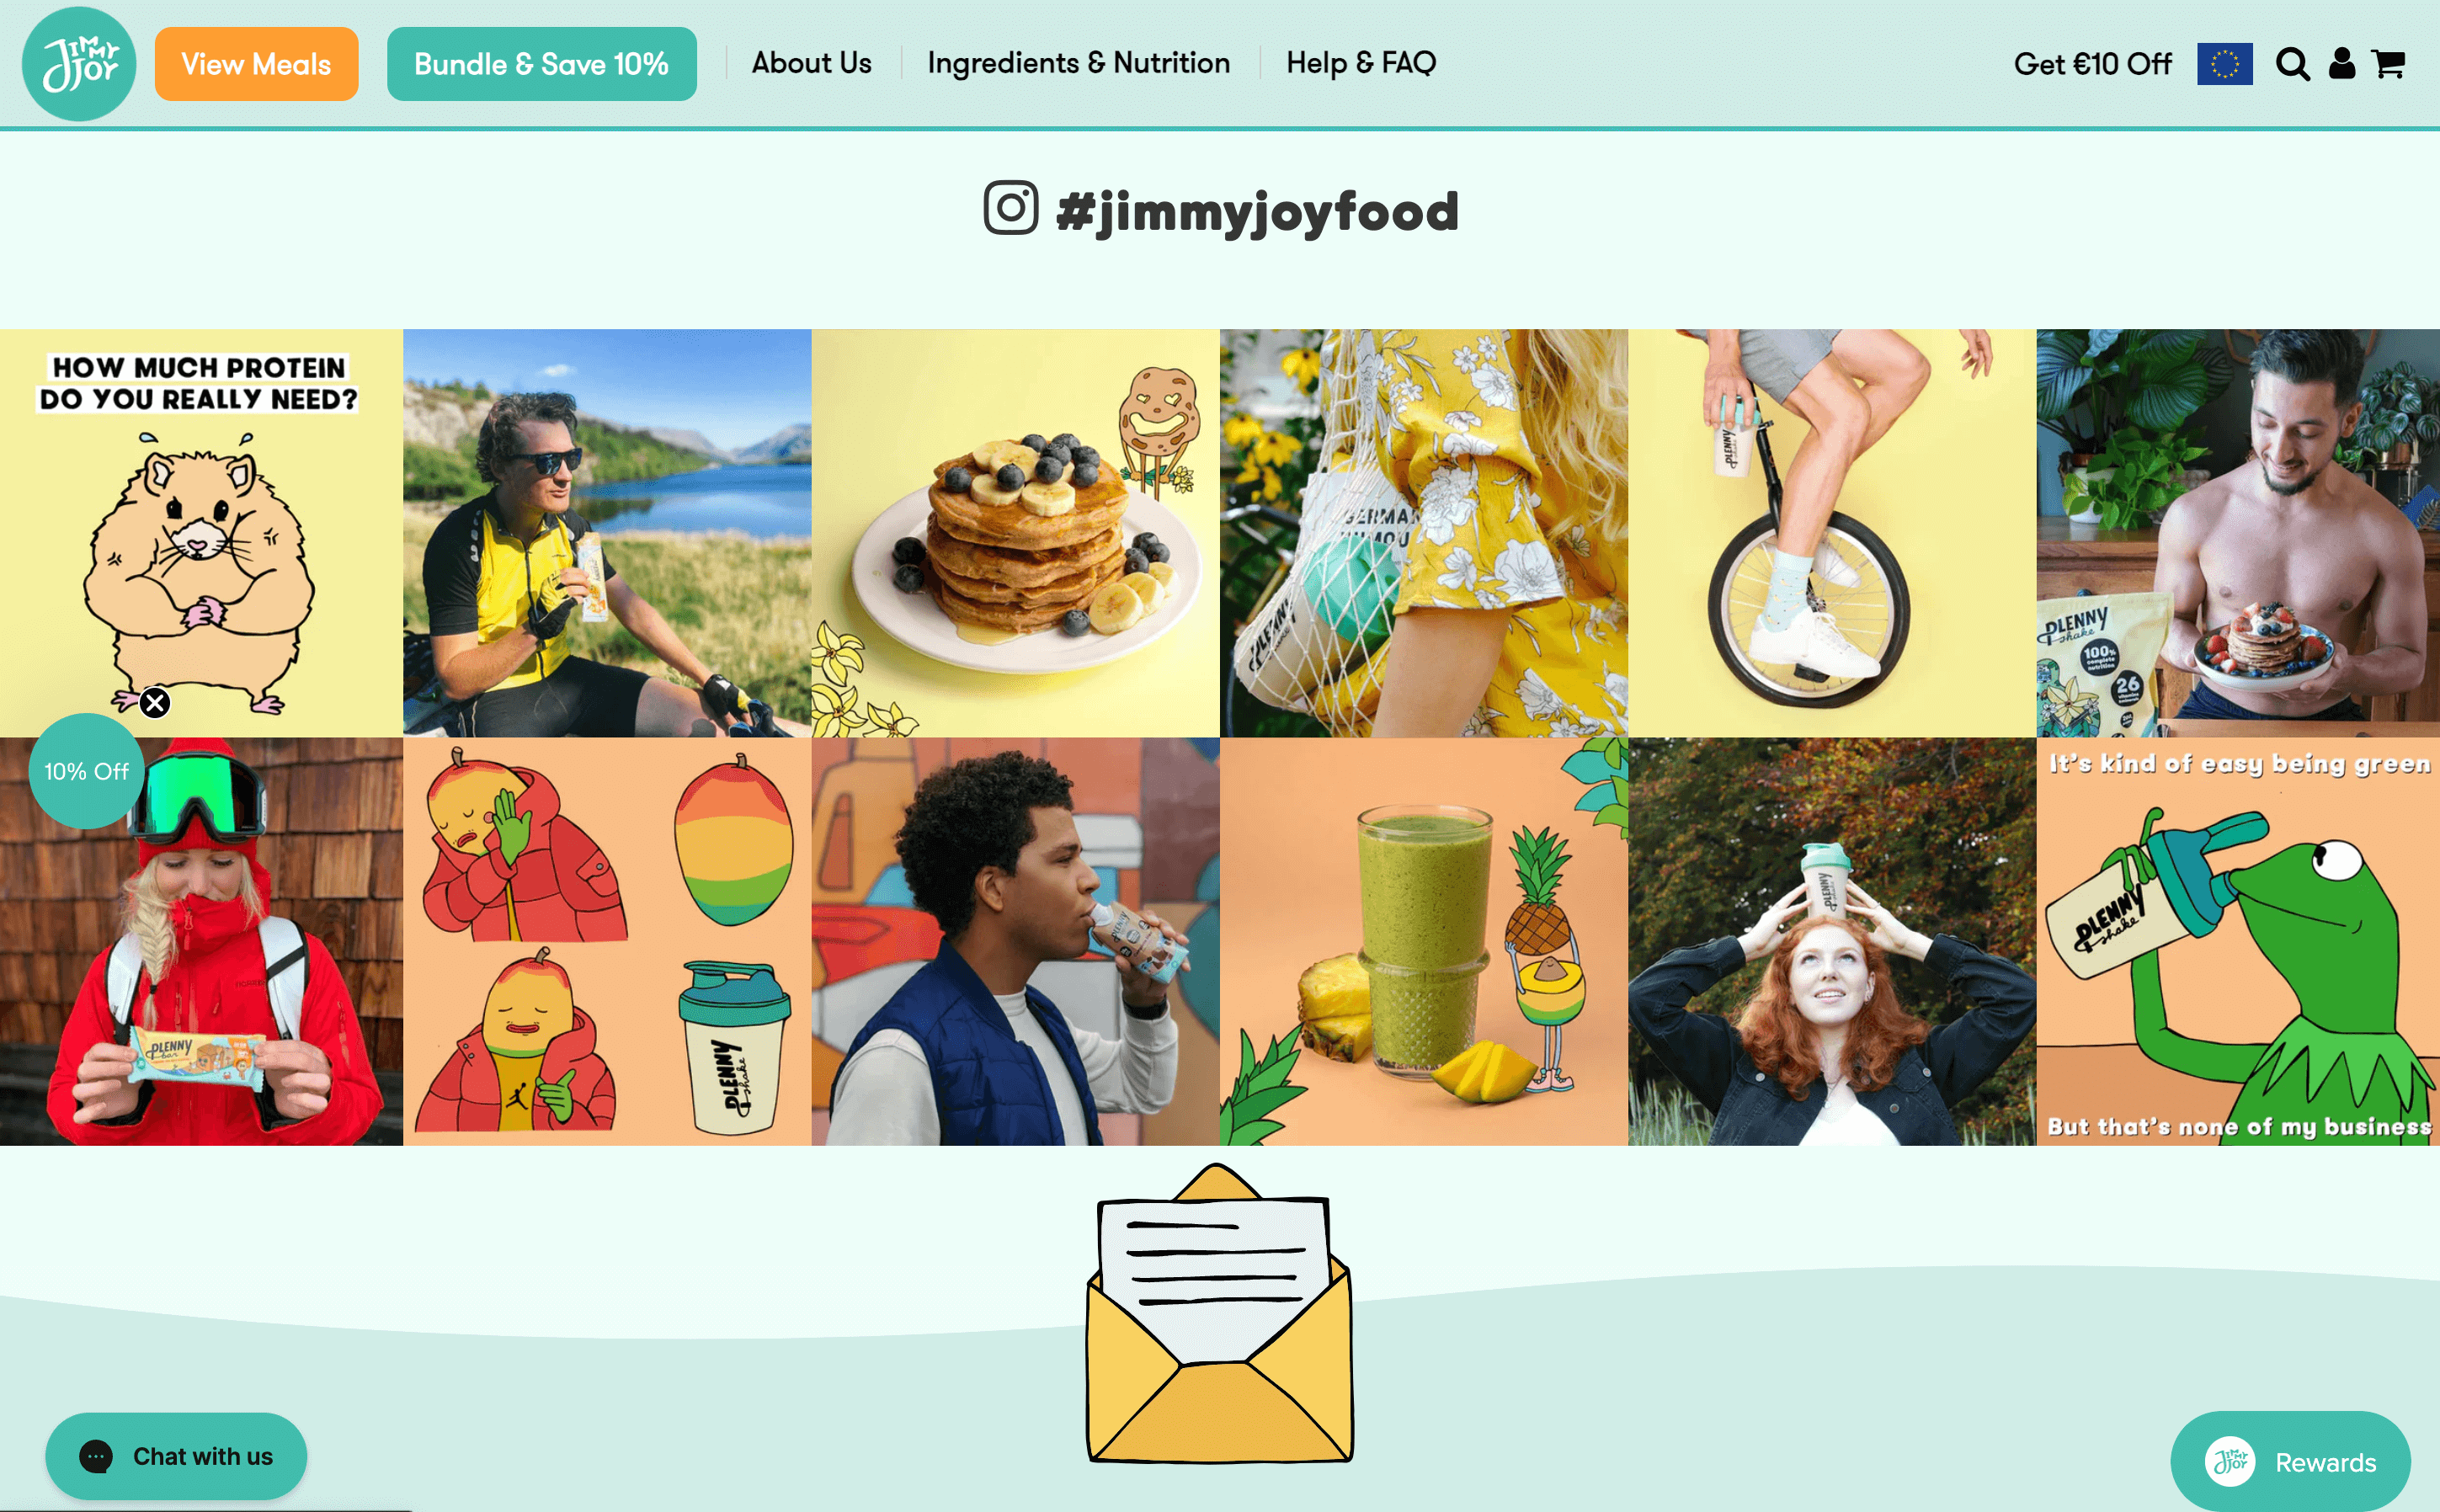 A screenshot from Jimmy Joy’s website showing a curated social media feed of user-generated content through the hashtag #JimmyJoyFood.